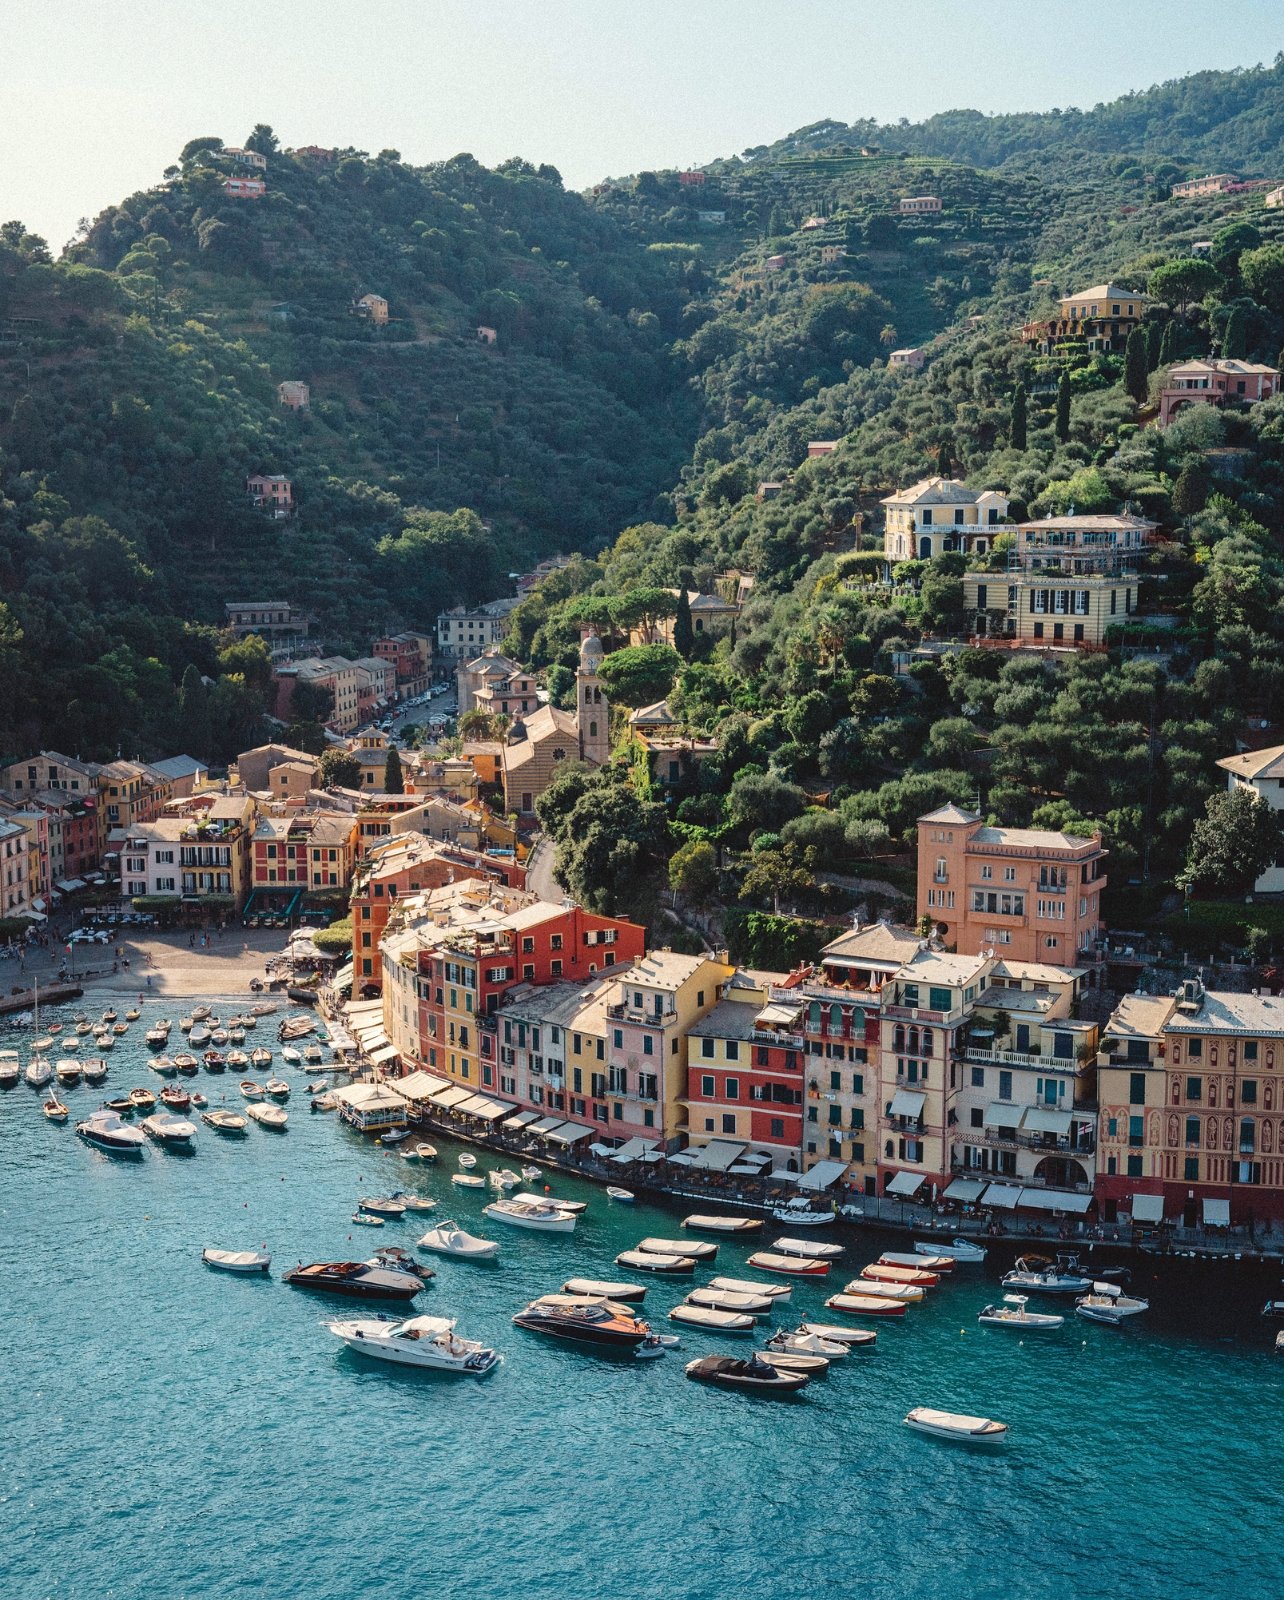 View of Splendido in Portofino, Italy with boats docked out front